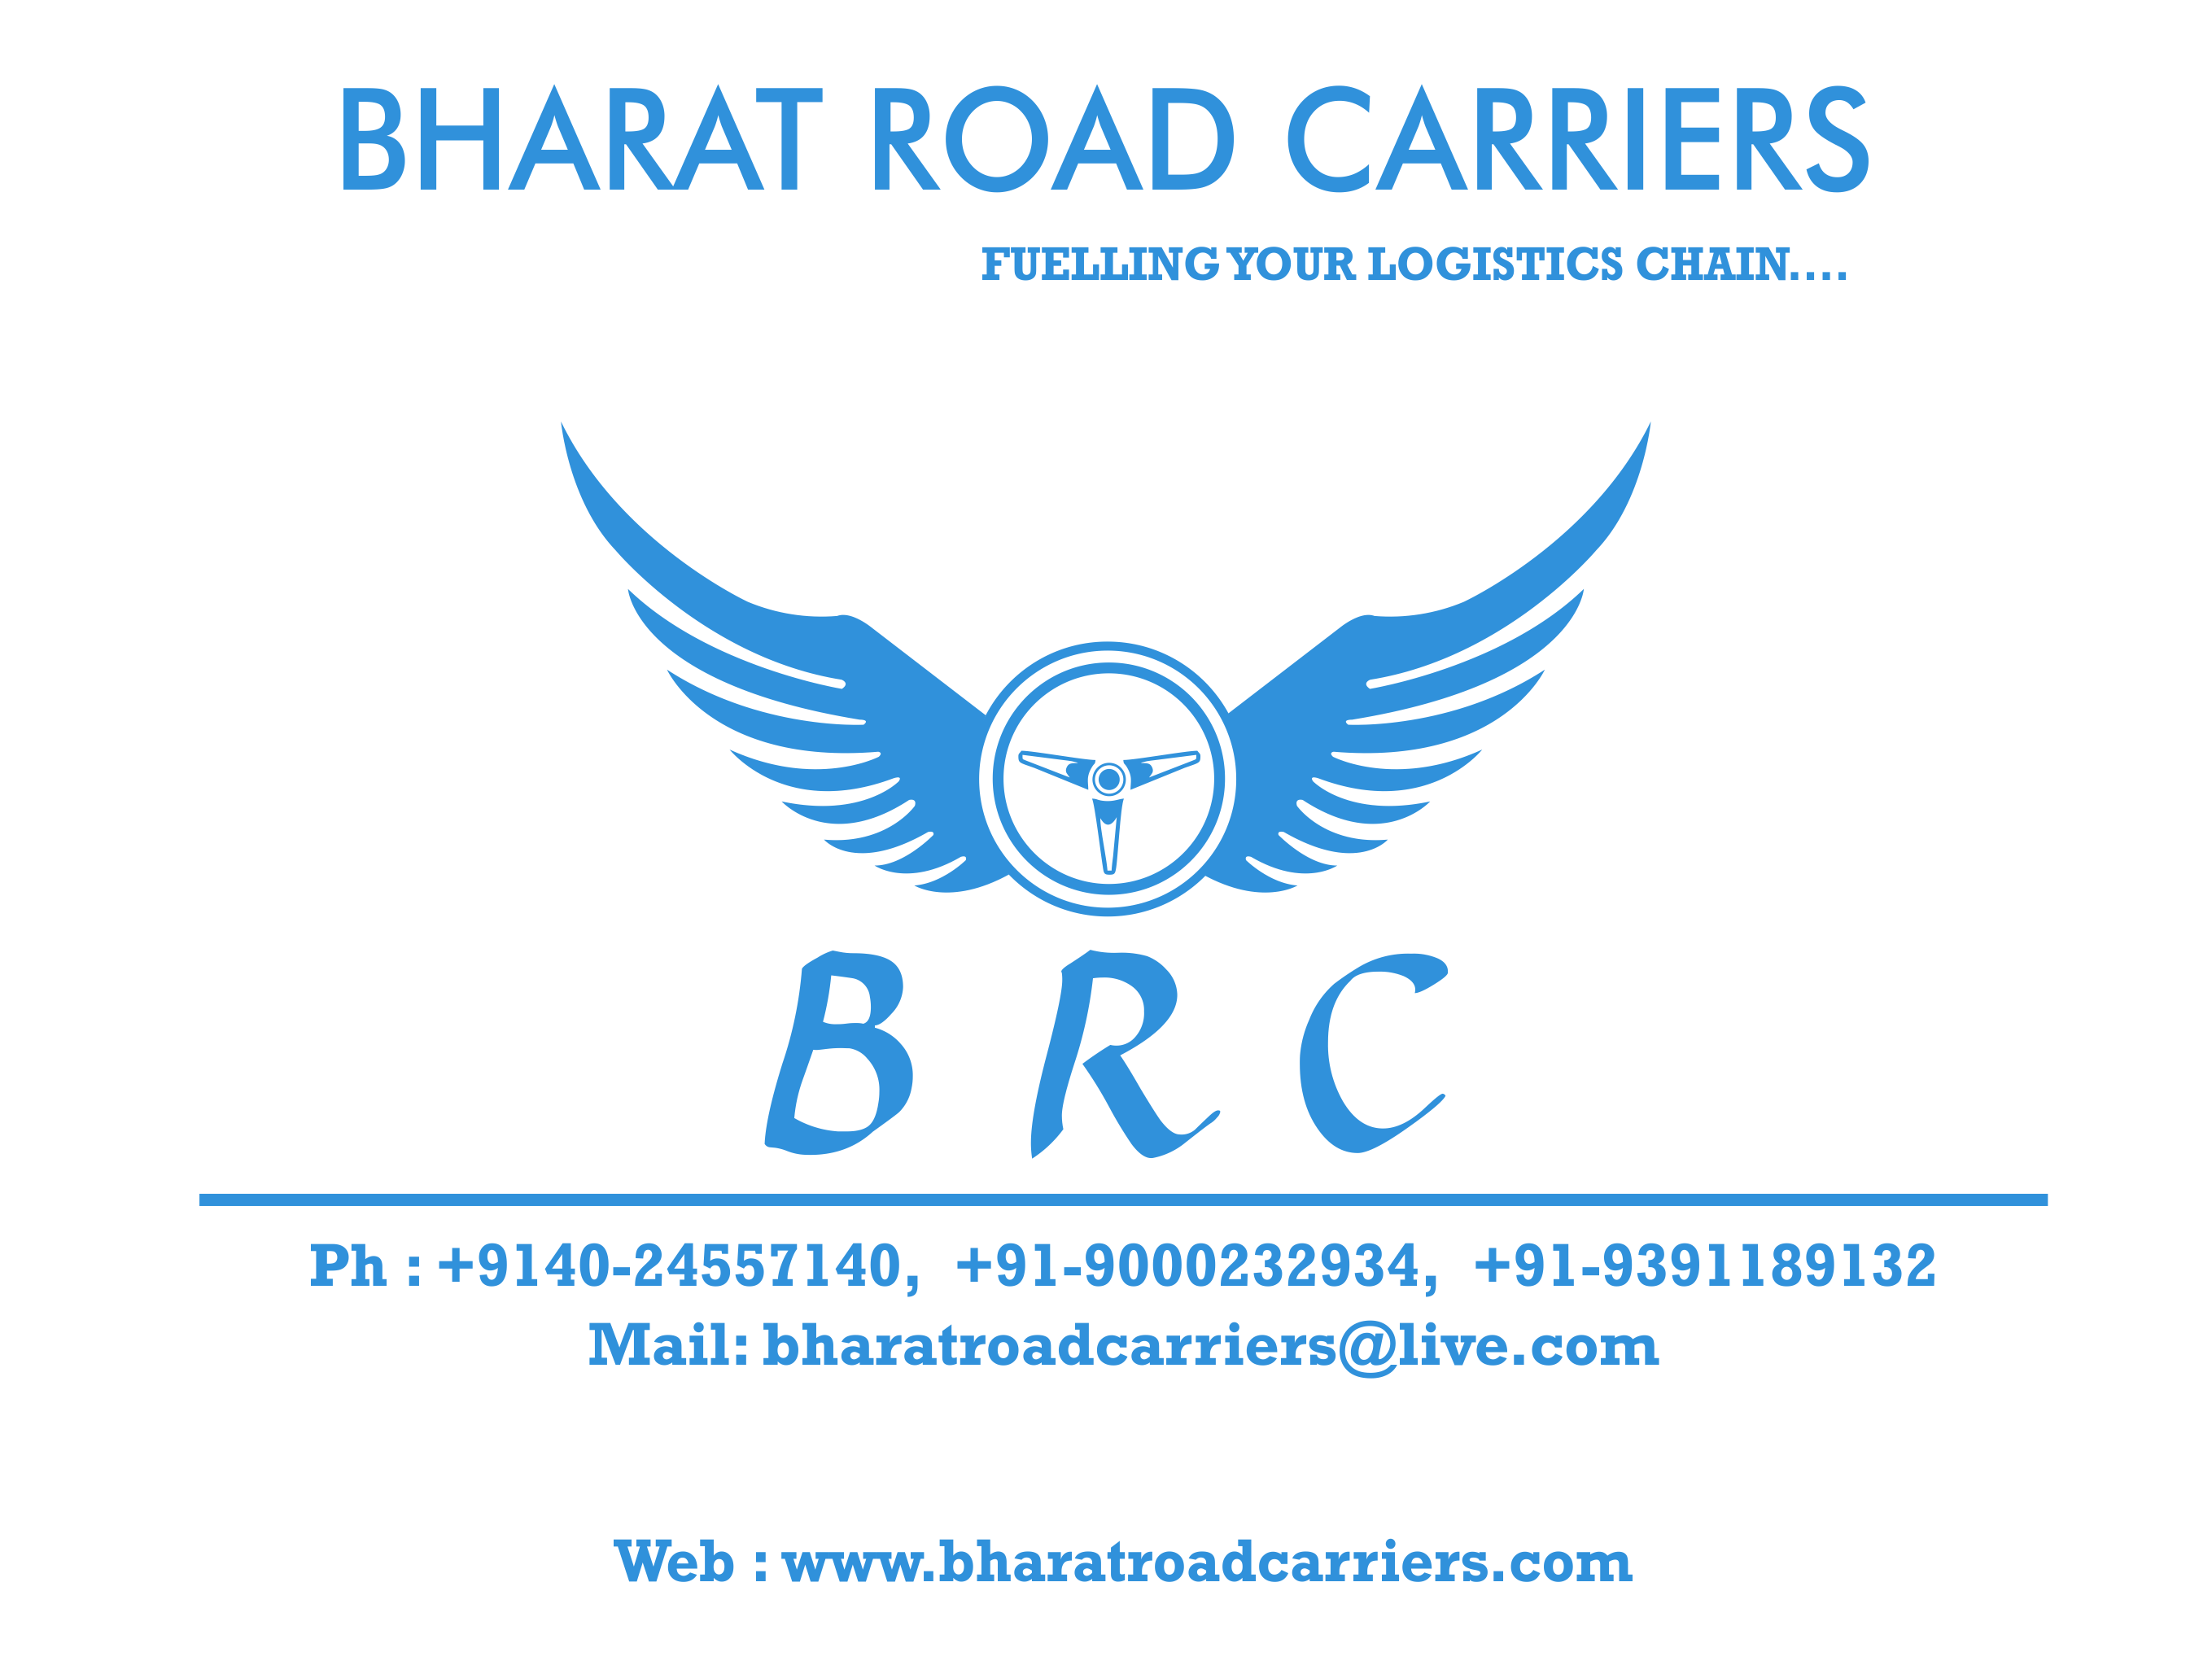 BHARAT ROAD CARRIERS